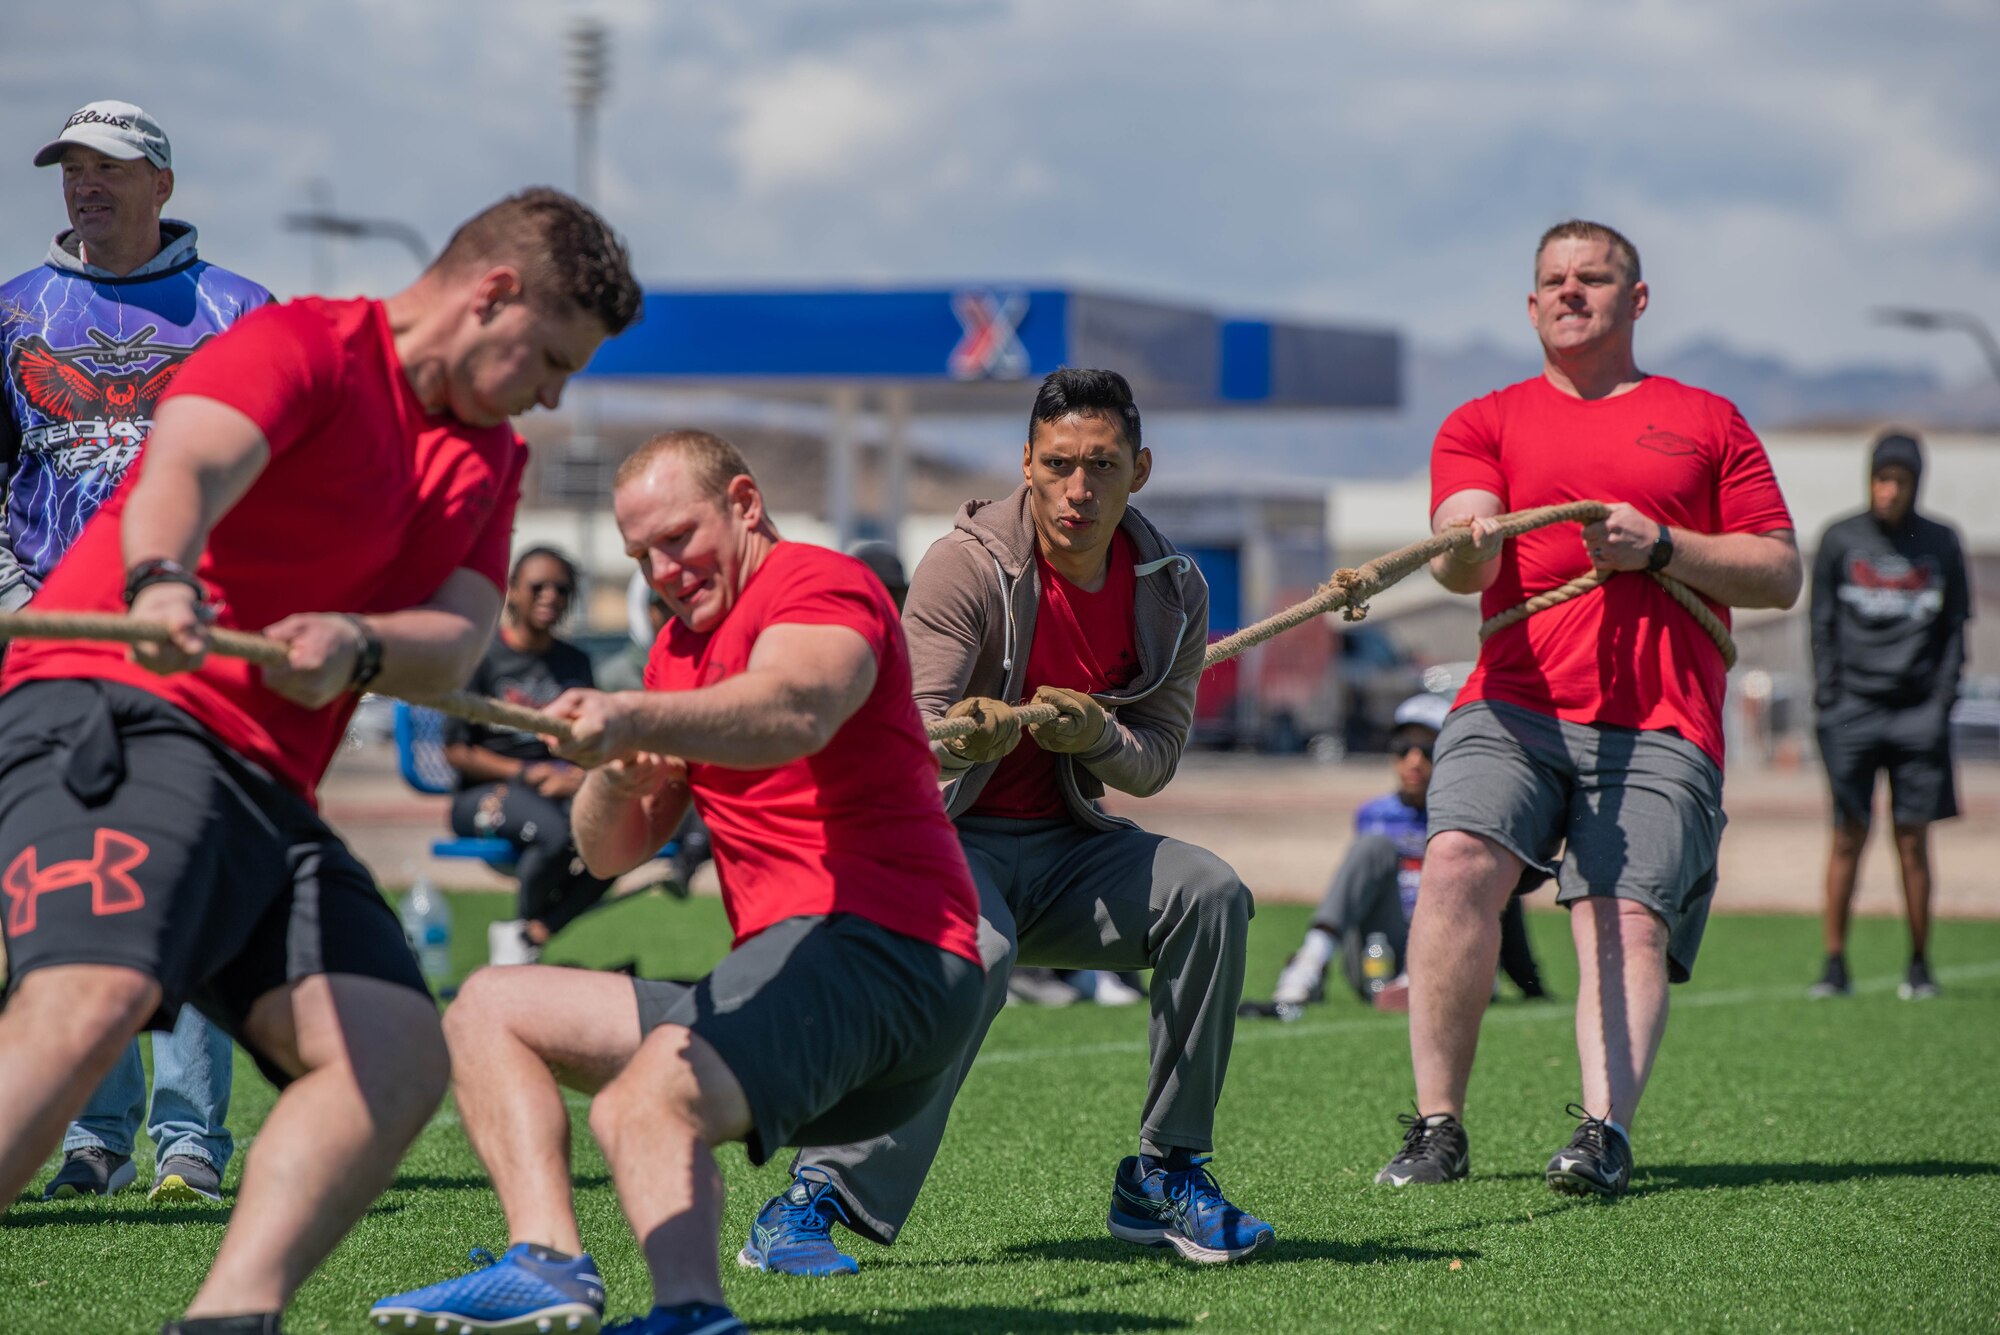 Four Airmen pull on a rope during a tug of war match on a turf field.